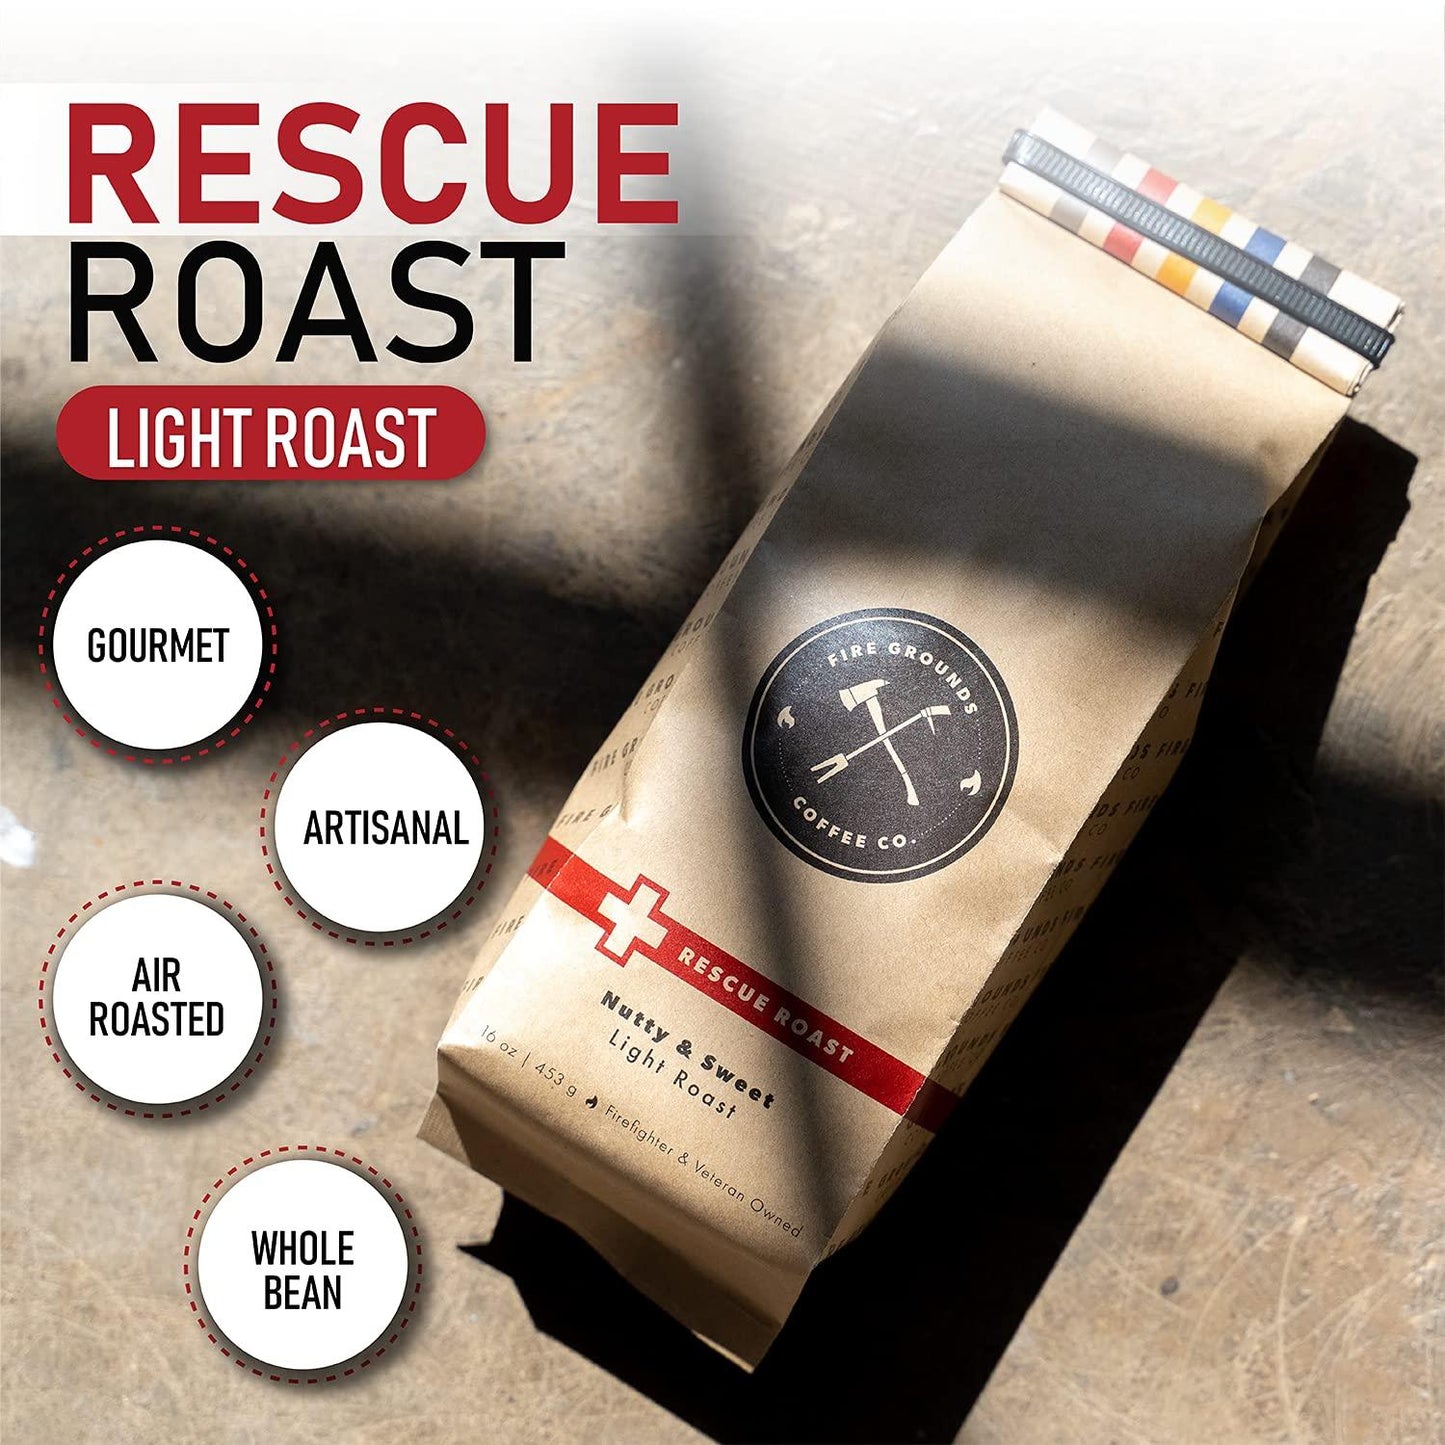 RESCUE ROAST (LIGHT ROAST) by Fire Grounds Coffee Company - The Hammer Sports